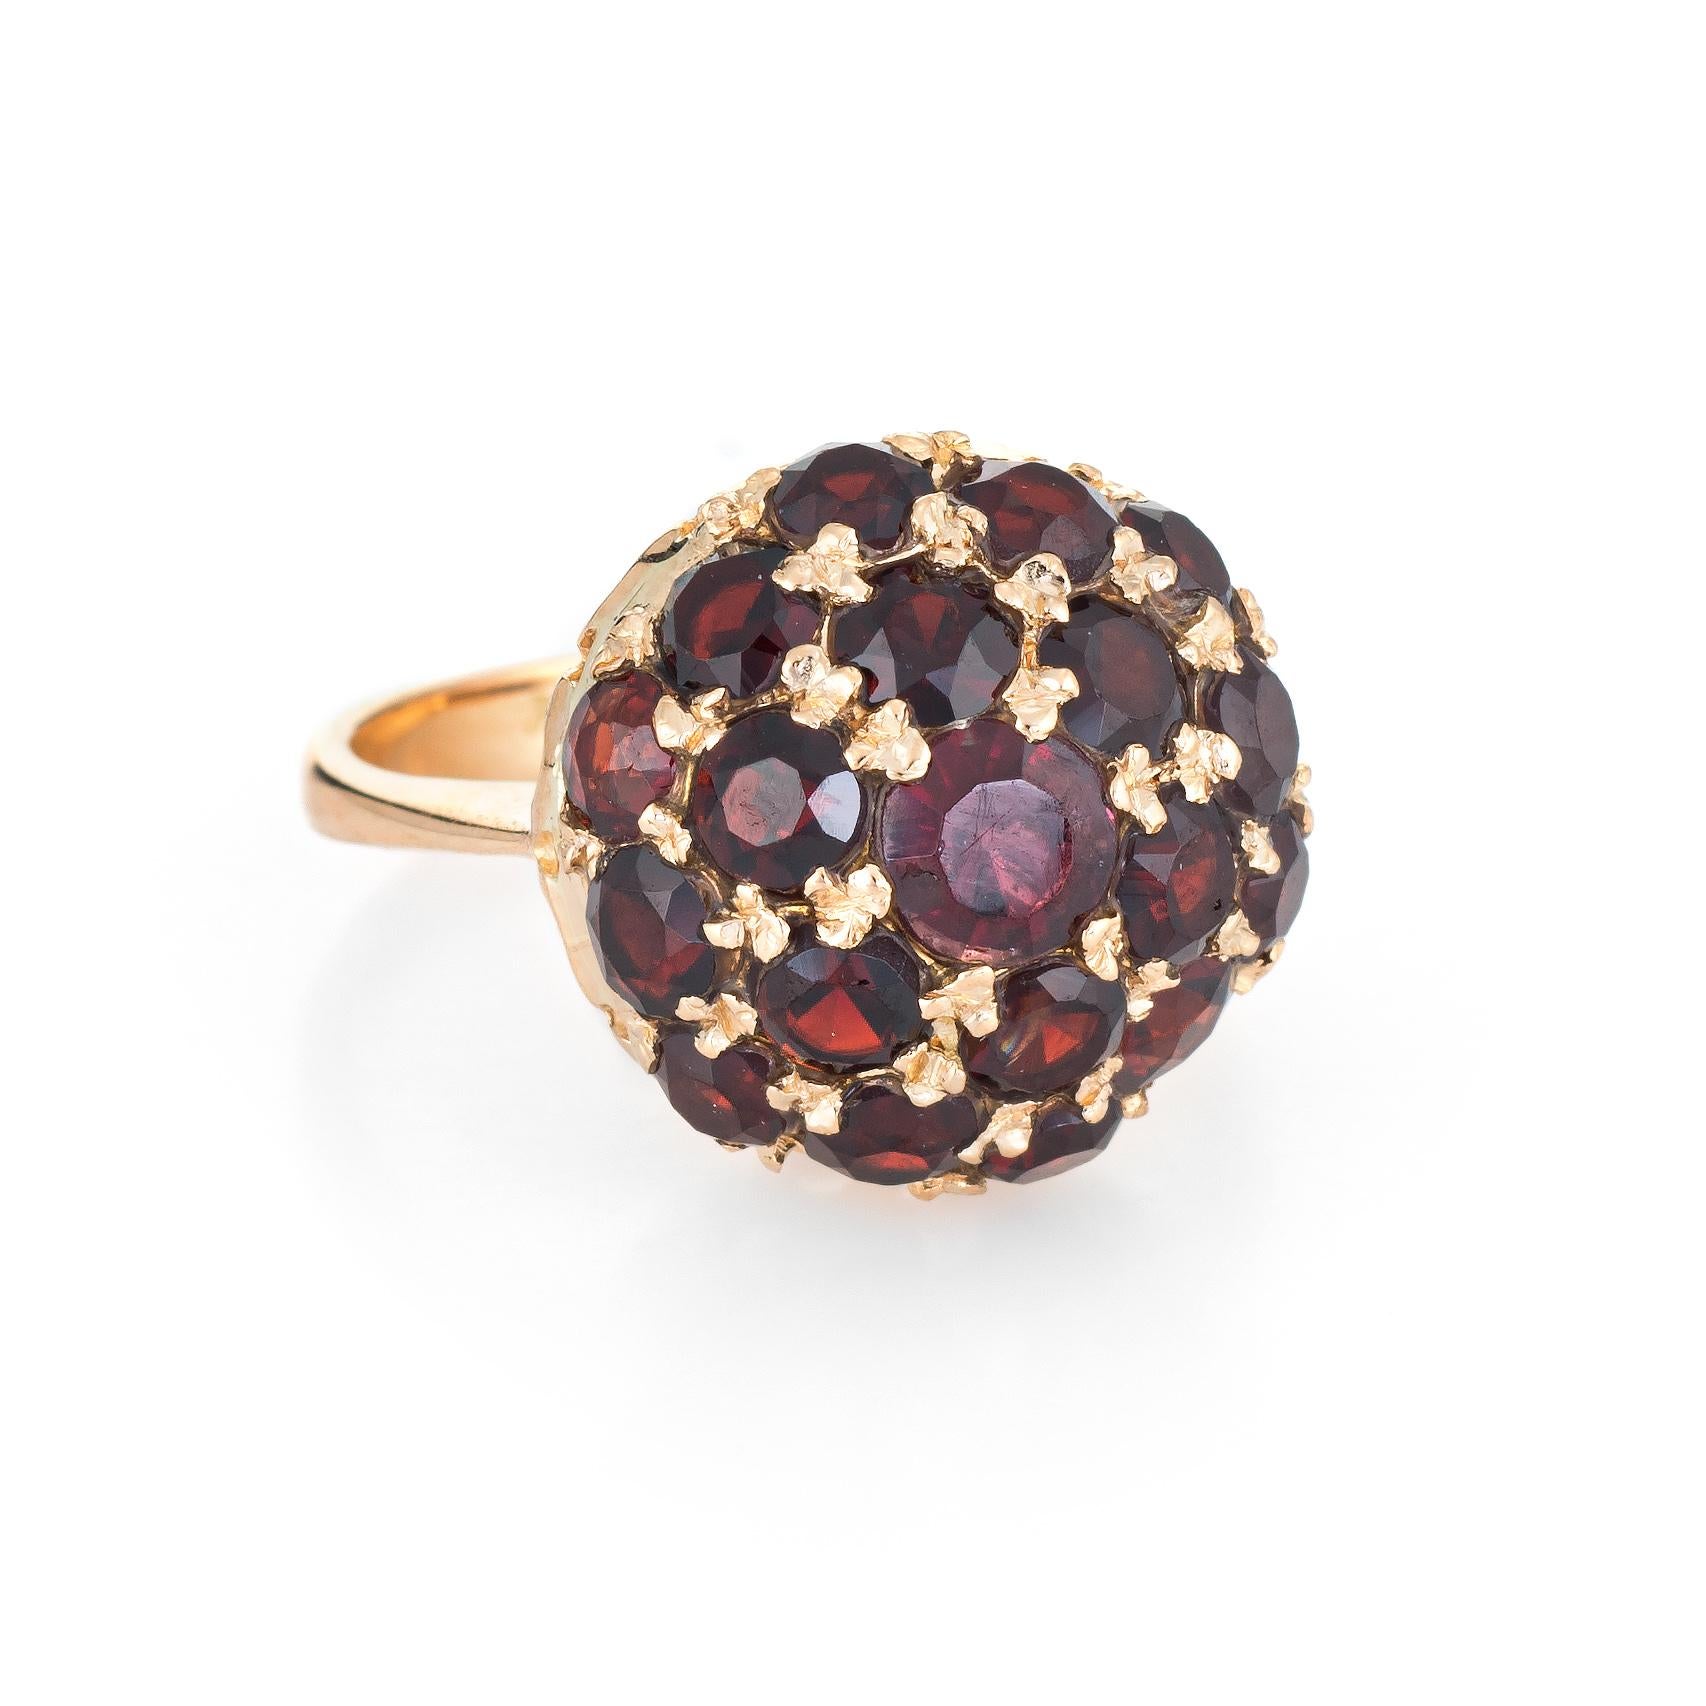 Finely detailed vintage garnet dome ring (circa 1960s to 1970s), crafted in 18 karat yellow gold. 

Garnets range in size from 0.10 to 0.20 carats and total an estimated 2 carats. The garnets are in excellent condition and free of cracks or chips.